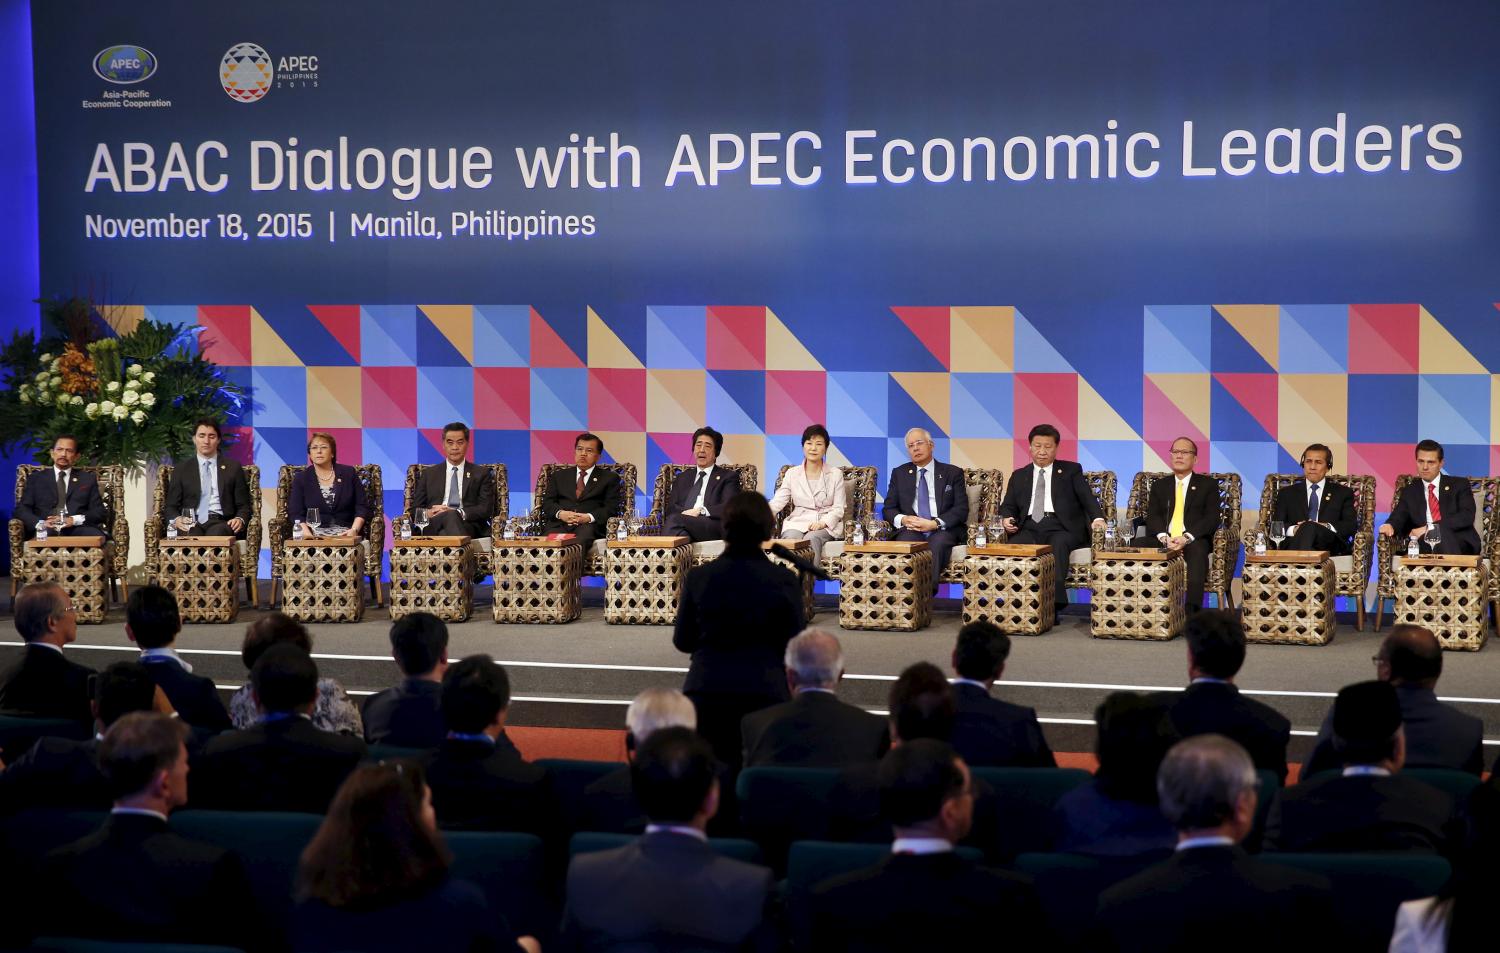 Leaders take a question from the floor during a APEC Business Advisory Council (ABAC) dialogue at the Asia-Pacific Economic Cooperation (APEC) summit in Manila, Philippines